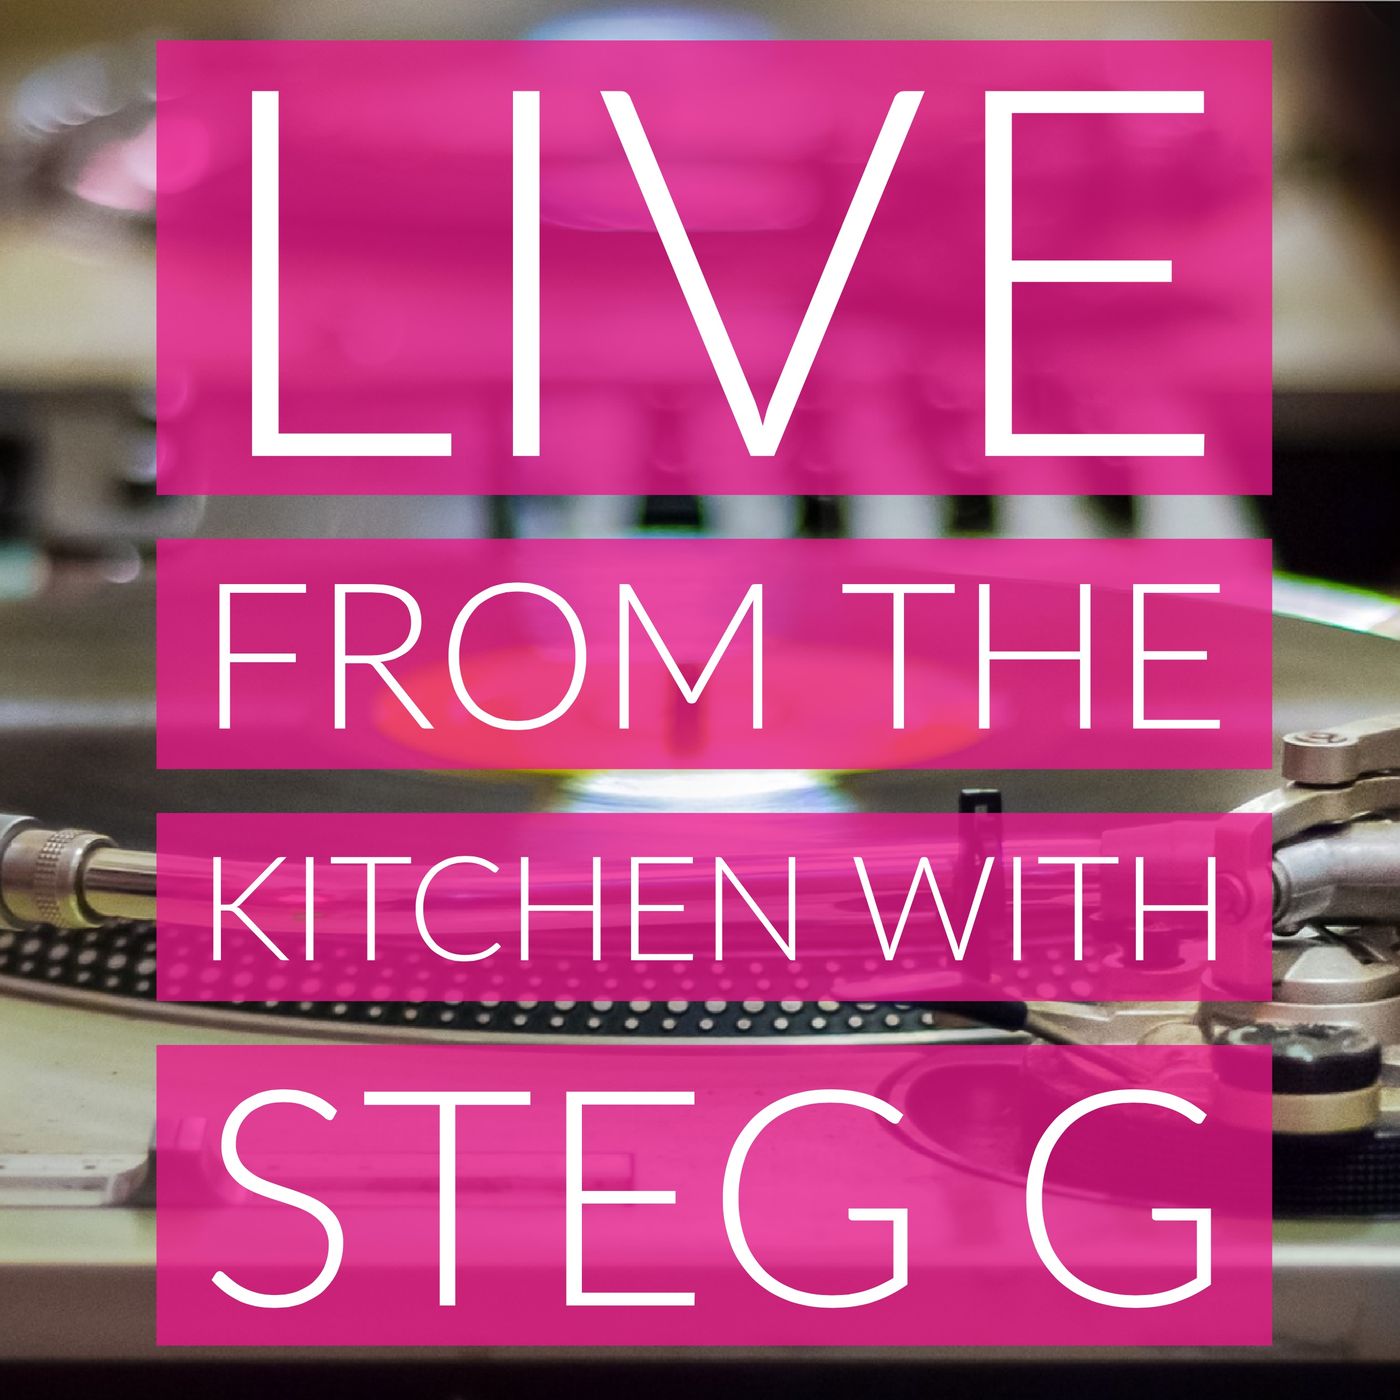 Live from the Kitchen with Steg G